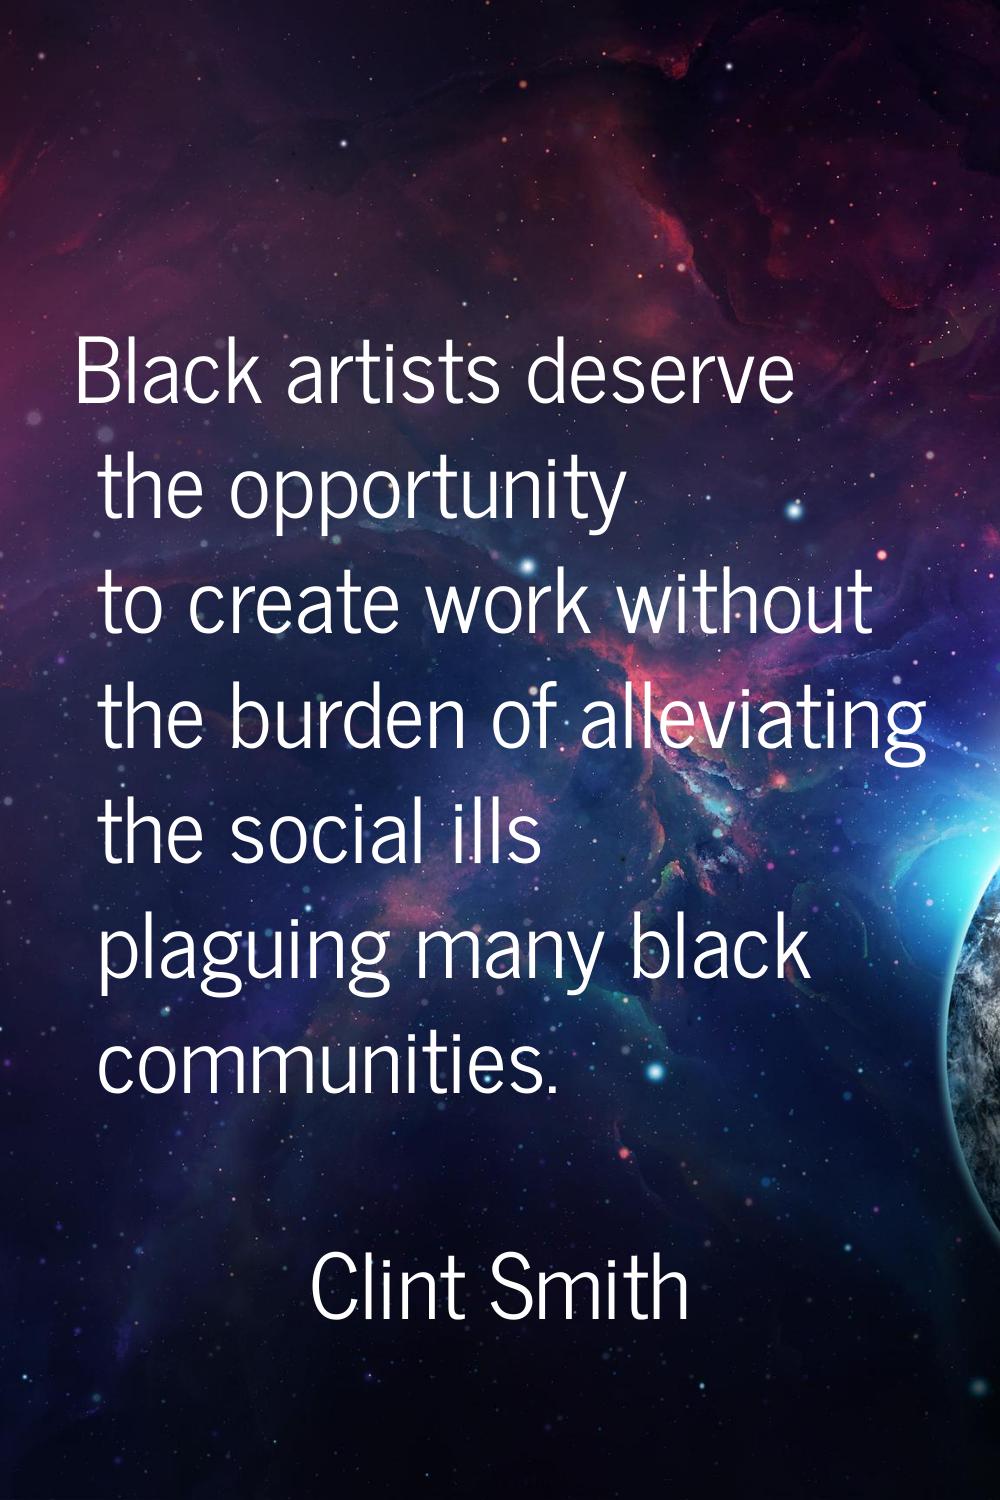 Black artists deserve the opportunity to create work without the burden of alleviating the social i